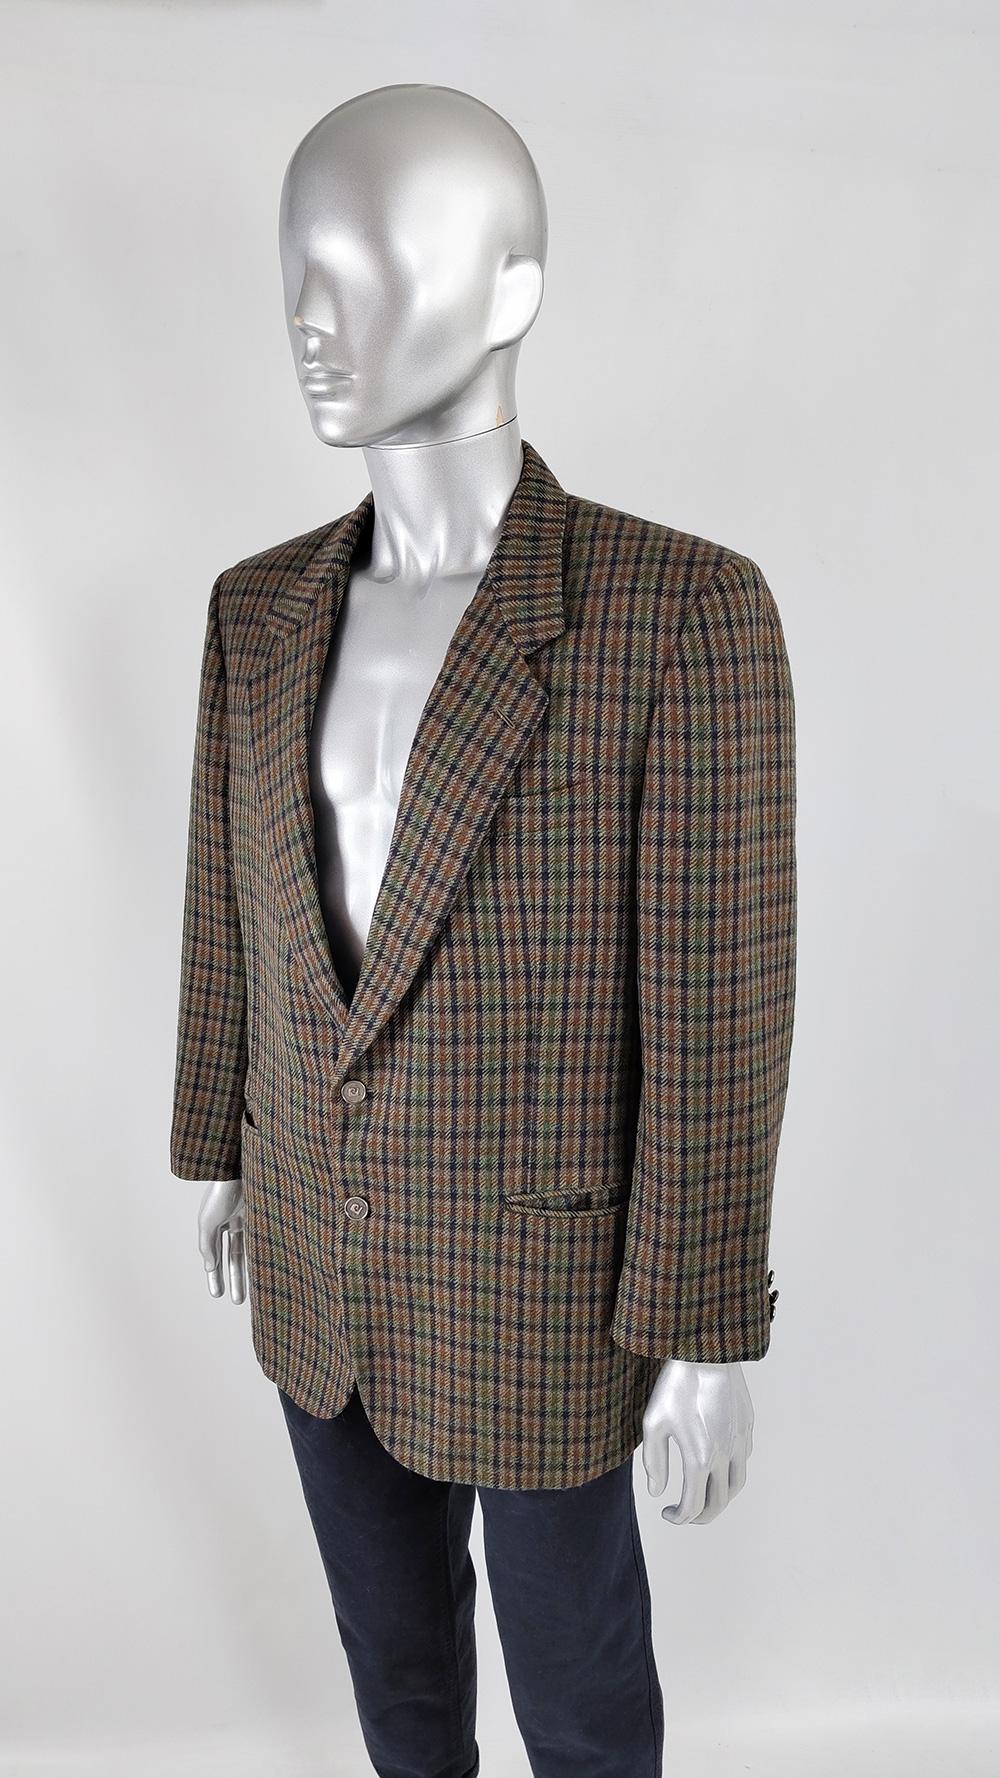 A stylish and rare vintage mens blazer from the 80s by luxury French fashion designer, Pierre Cardin. Made in Italy, from a pure new wool green, grey, brown and blue check tweed fabric. It has a classic, sophisticated cut with single breasted metal